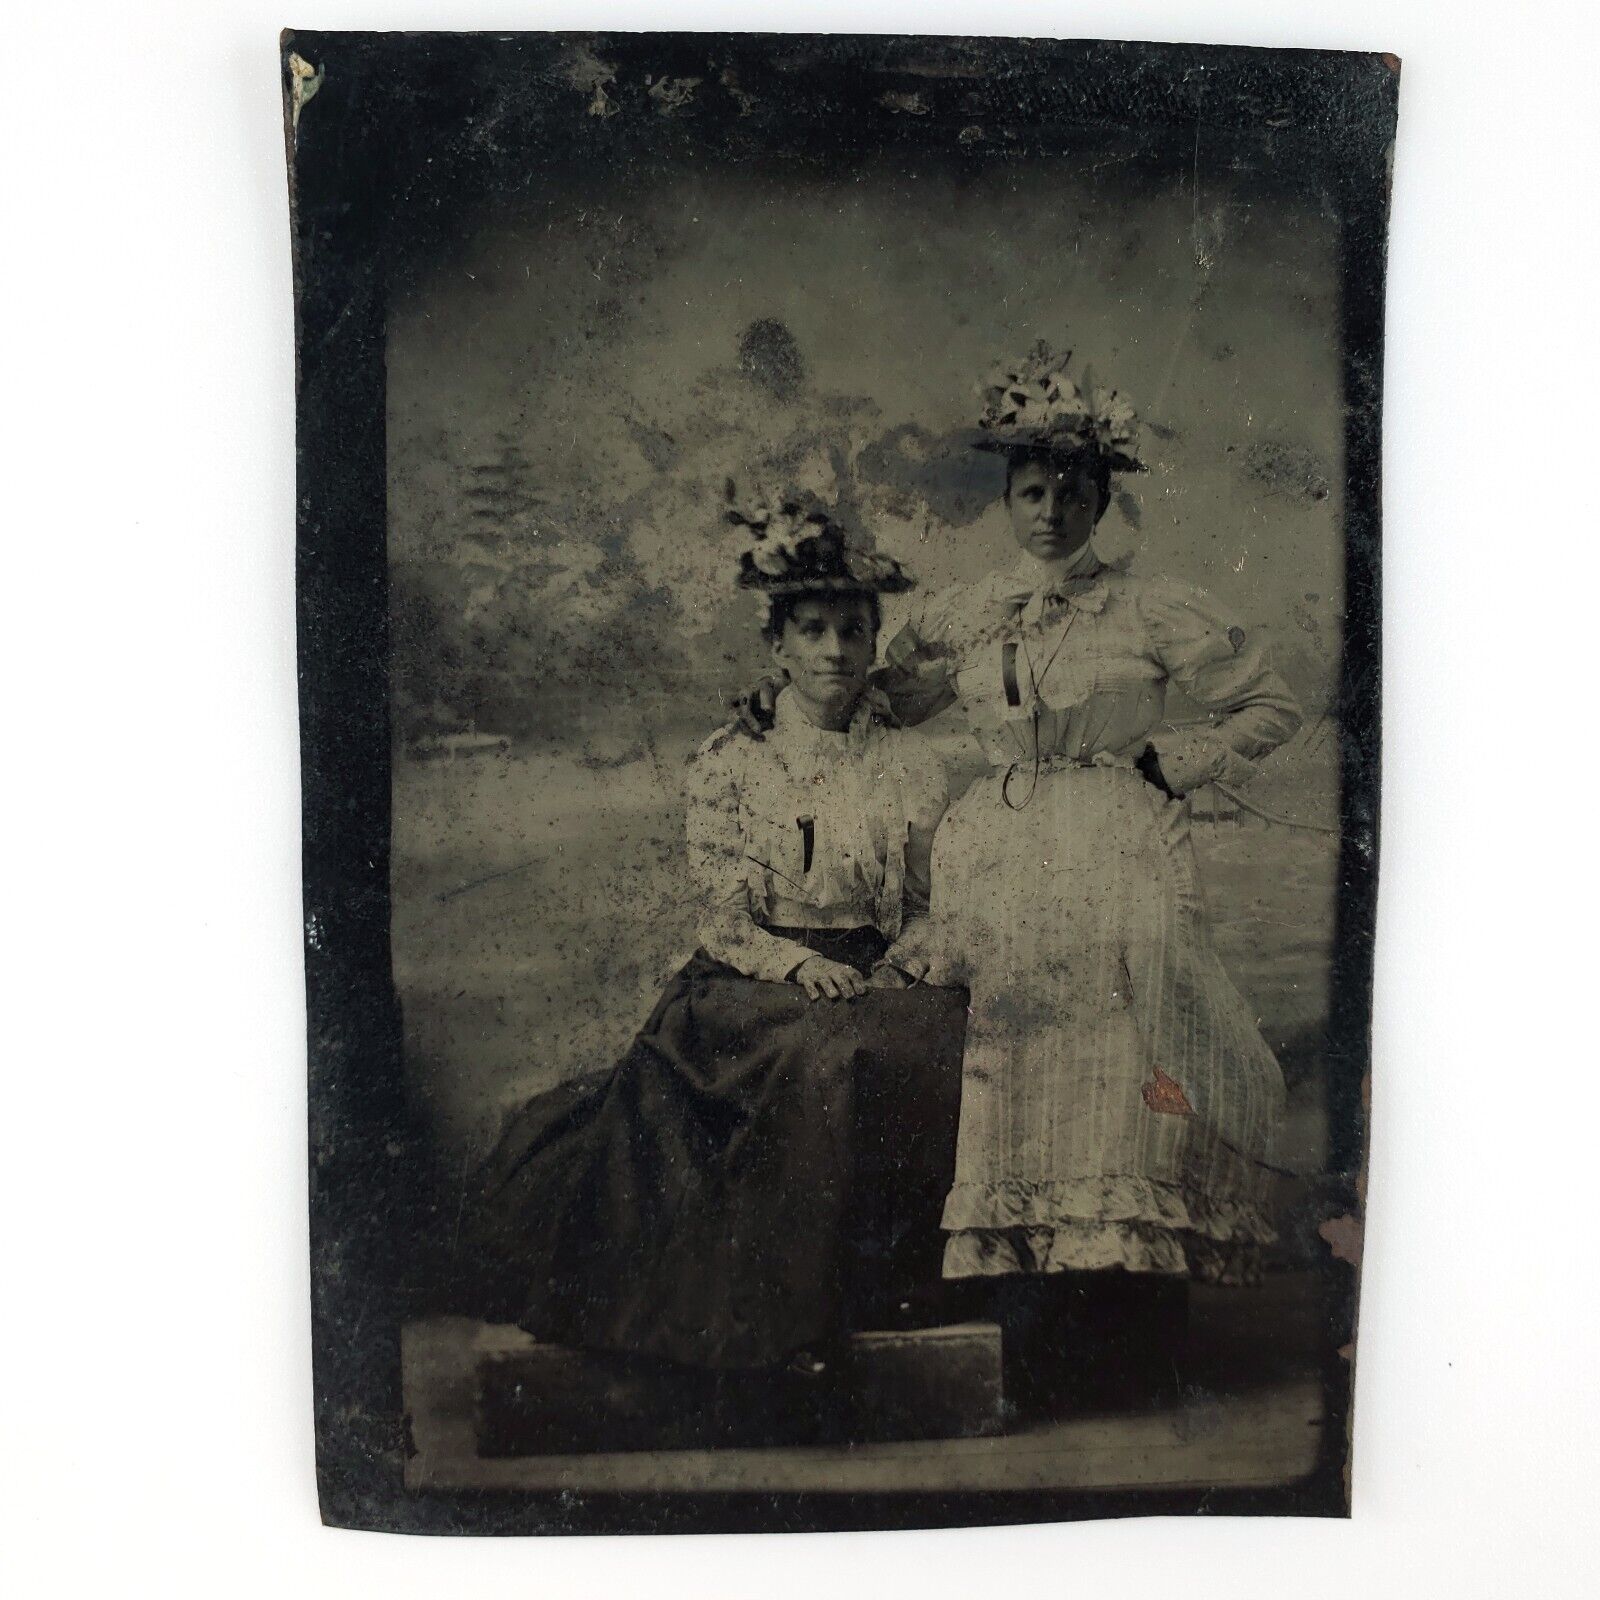 Affectionate Distressed Rusty Girls Tintype c1870 Antique 1/6 Plate Photo D936